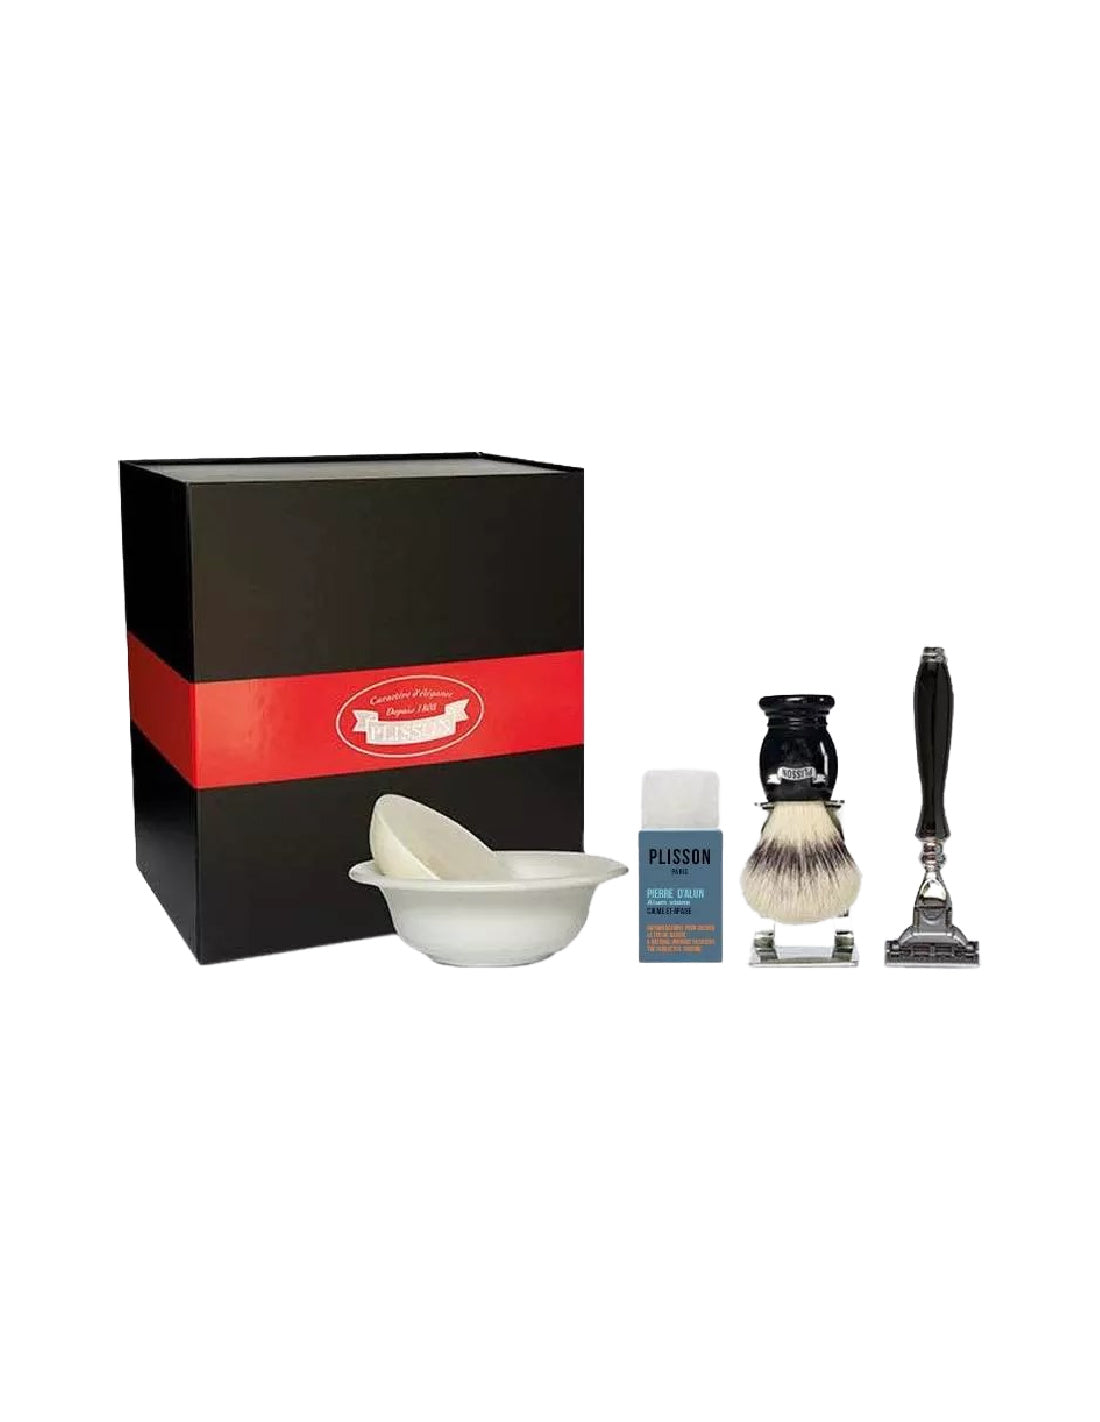 Plisson 1808 Shaving Gift Set with Soap and Alum Stone